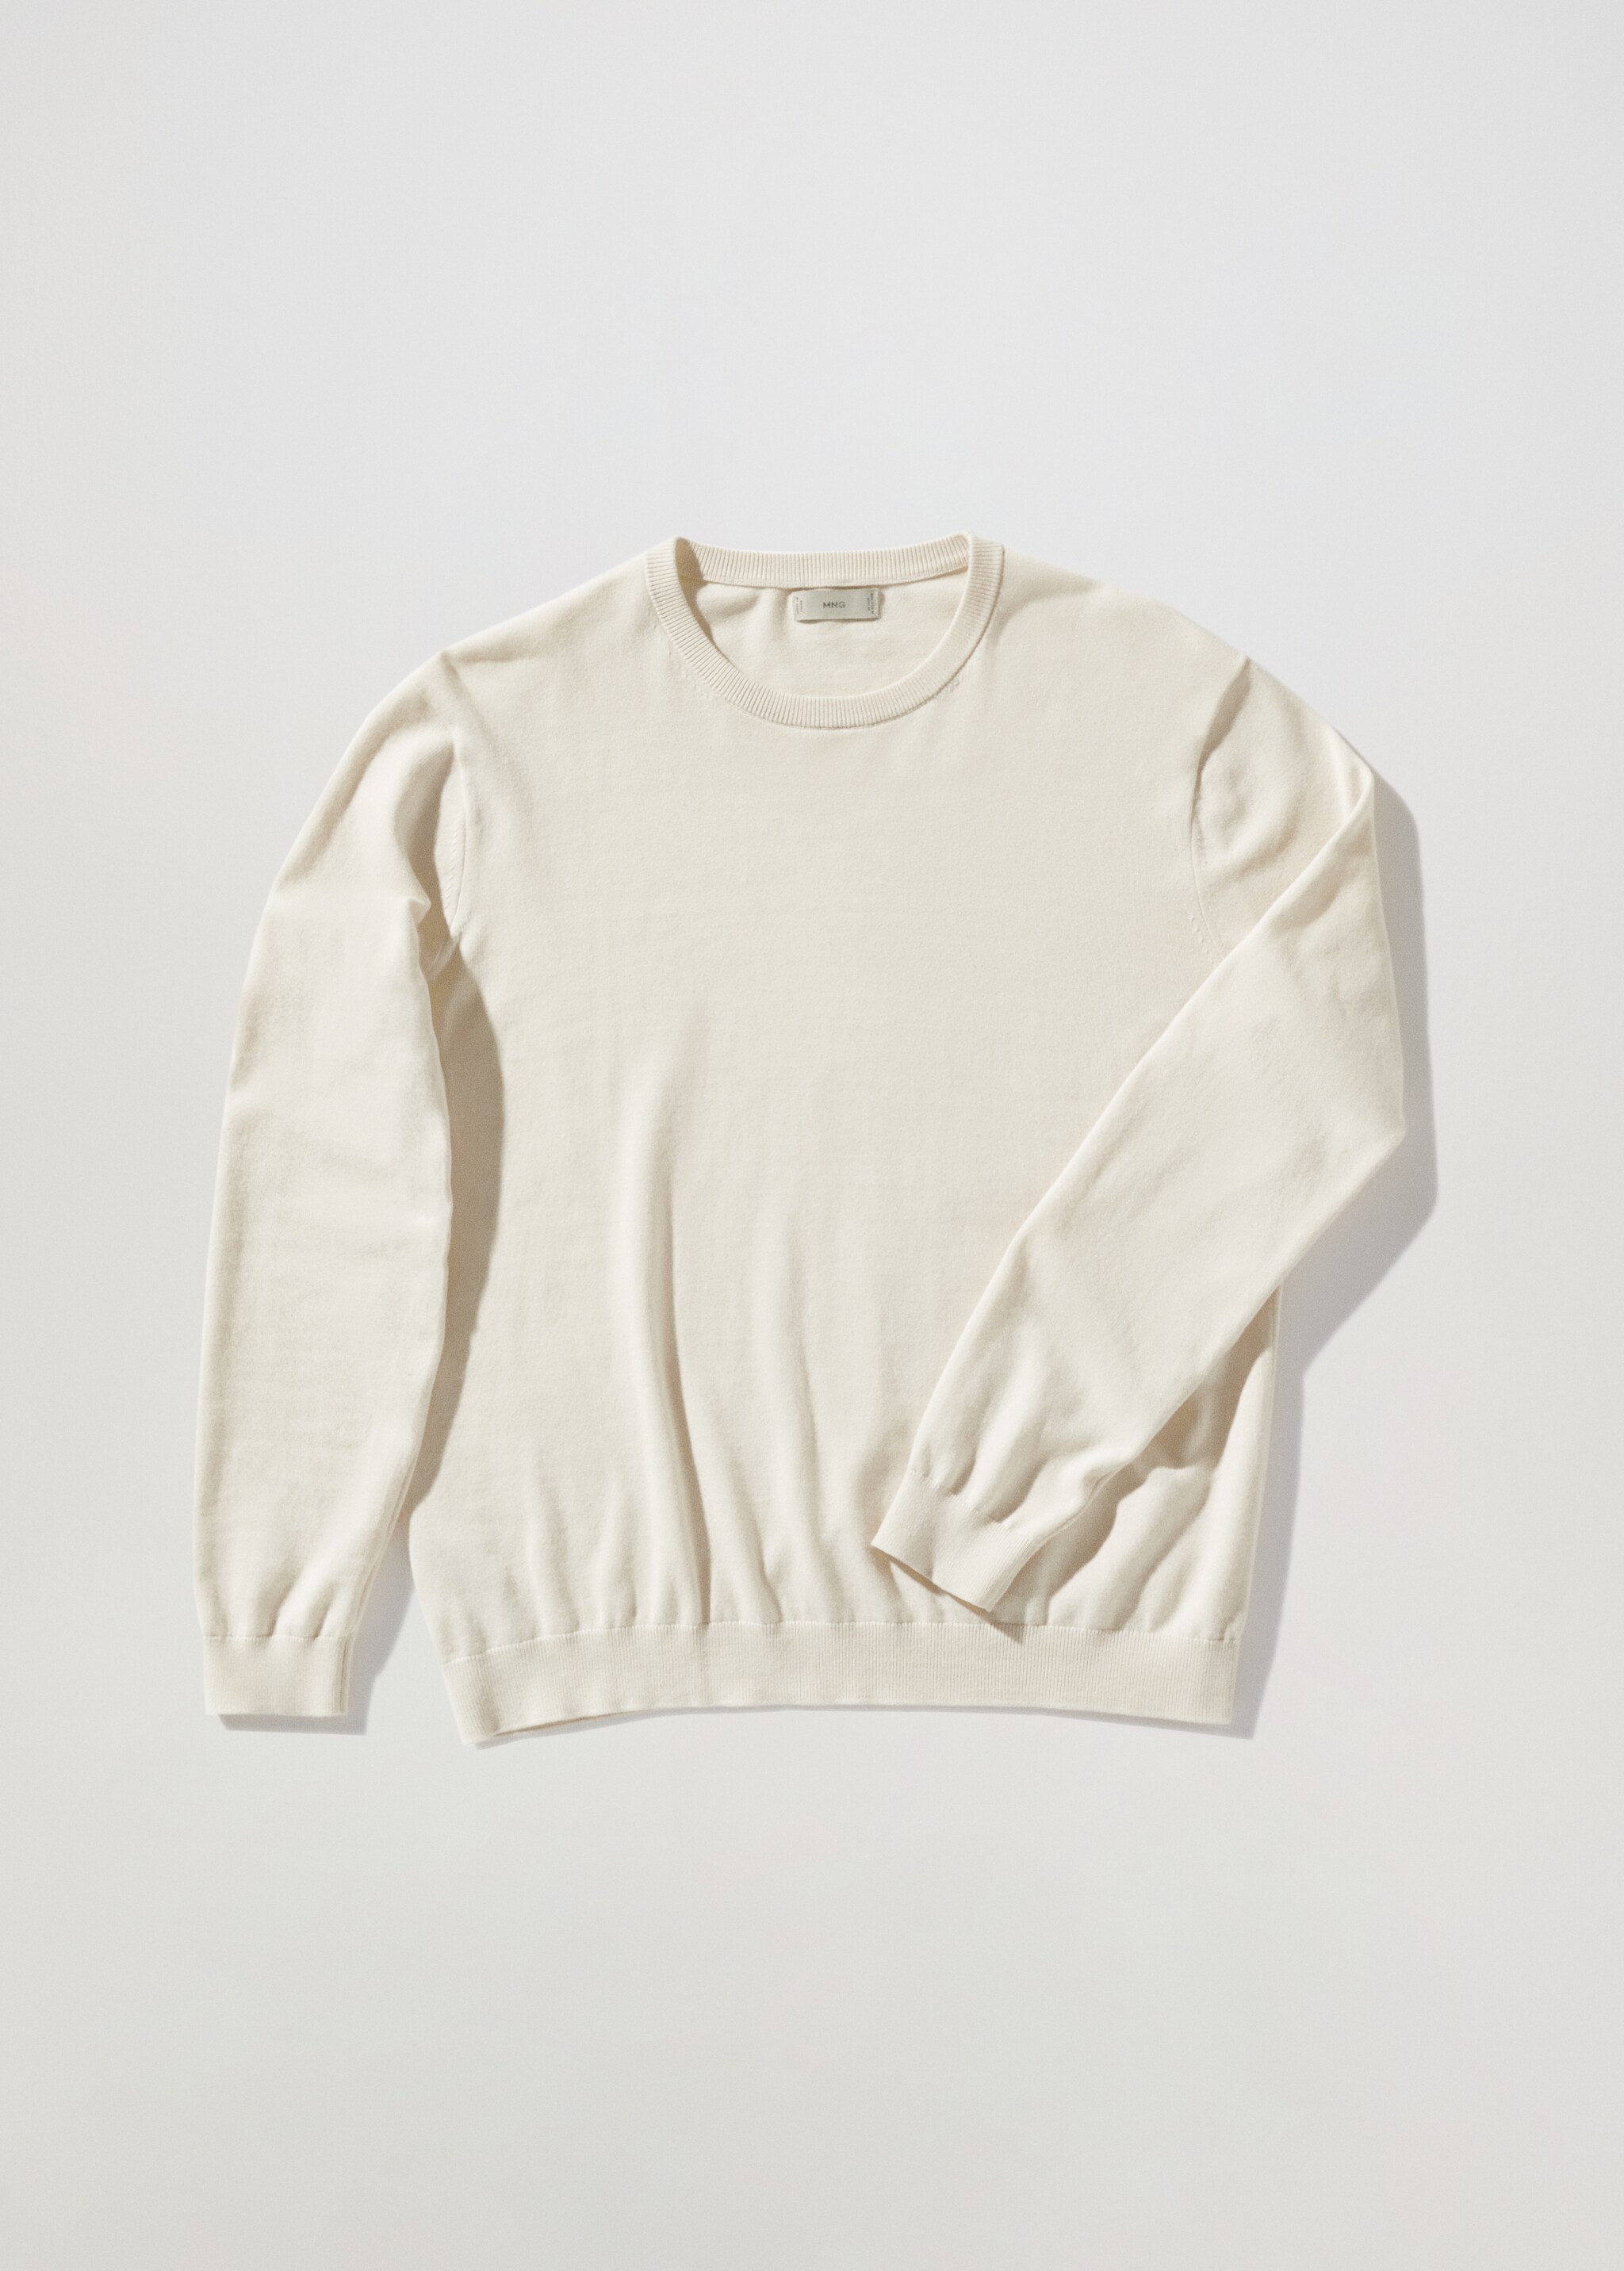 Fine-knit cotton sweater - Article without model